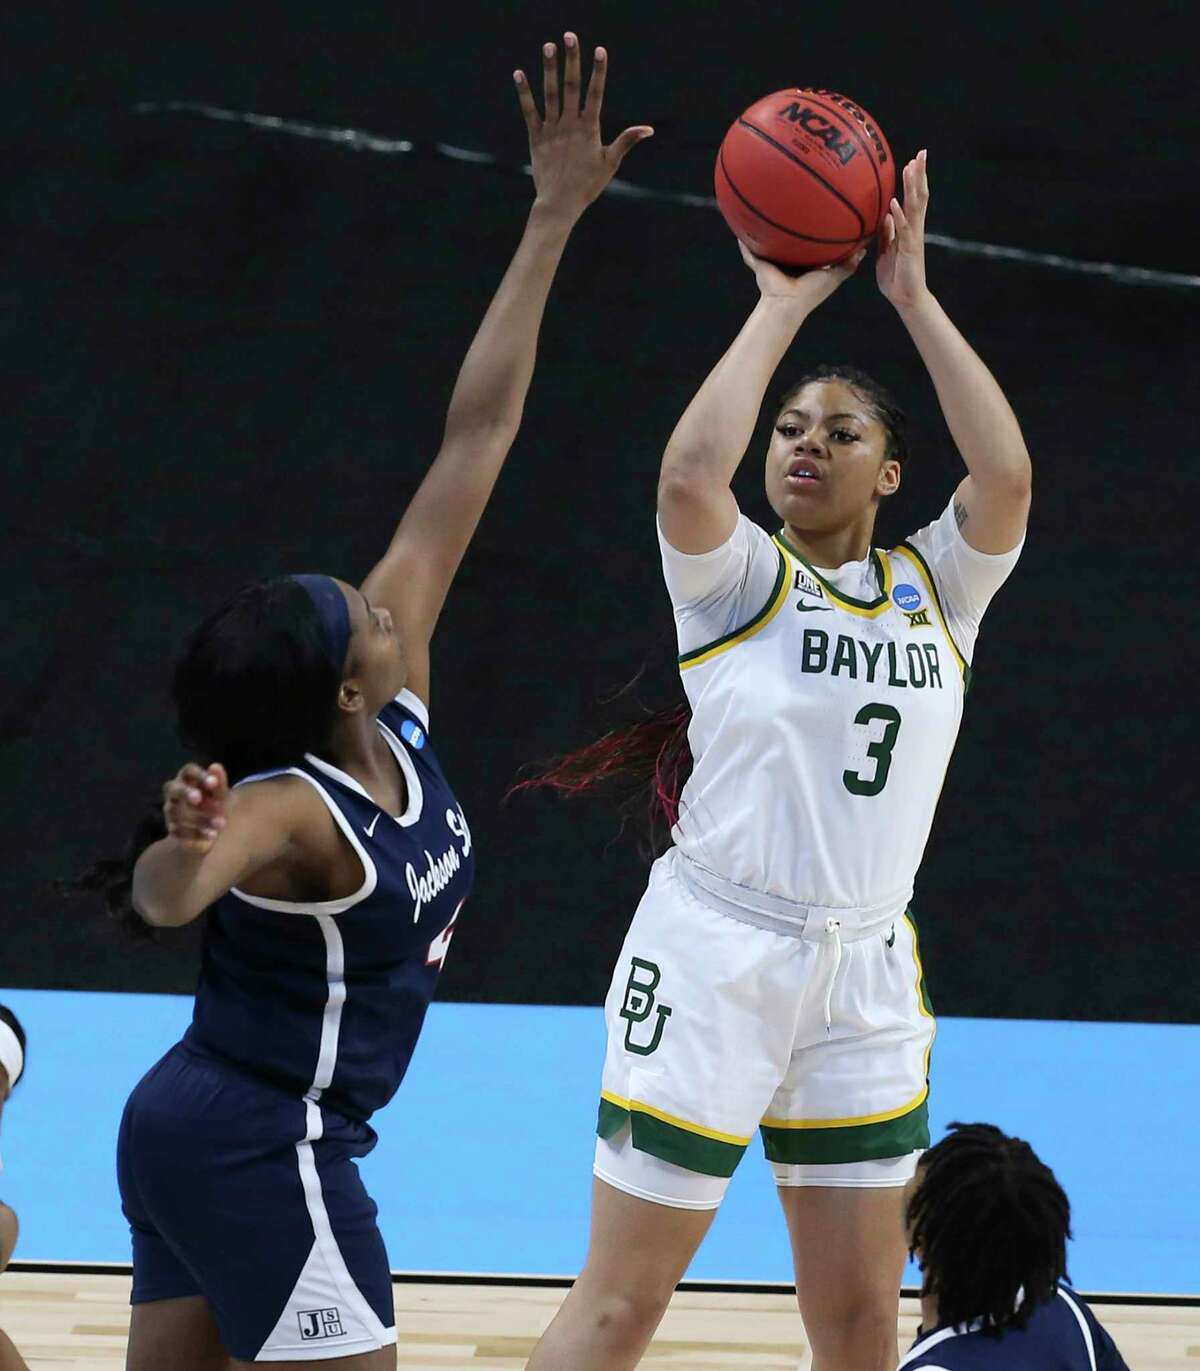 Baylor's Trinity Oliver (03) shoots over Jackson State's Ameshya Williams (04) in the first round of the 2021 NCAA Div. I Women's Basketball Championship at the Alamodome on Sunday, Mar. 21, 2021. Baylor defeated Jackson State, 101-52 to move onto the second round.